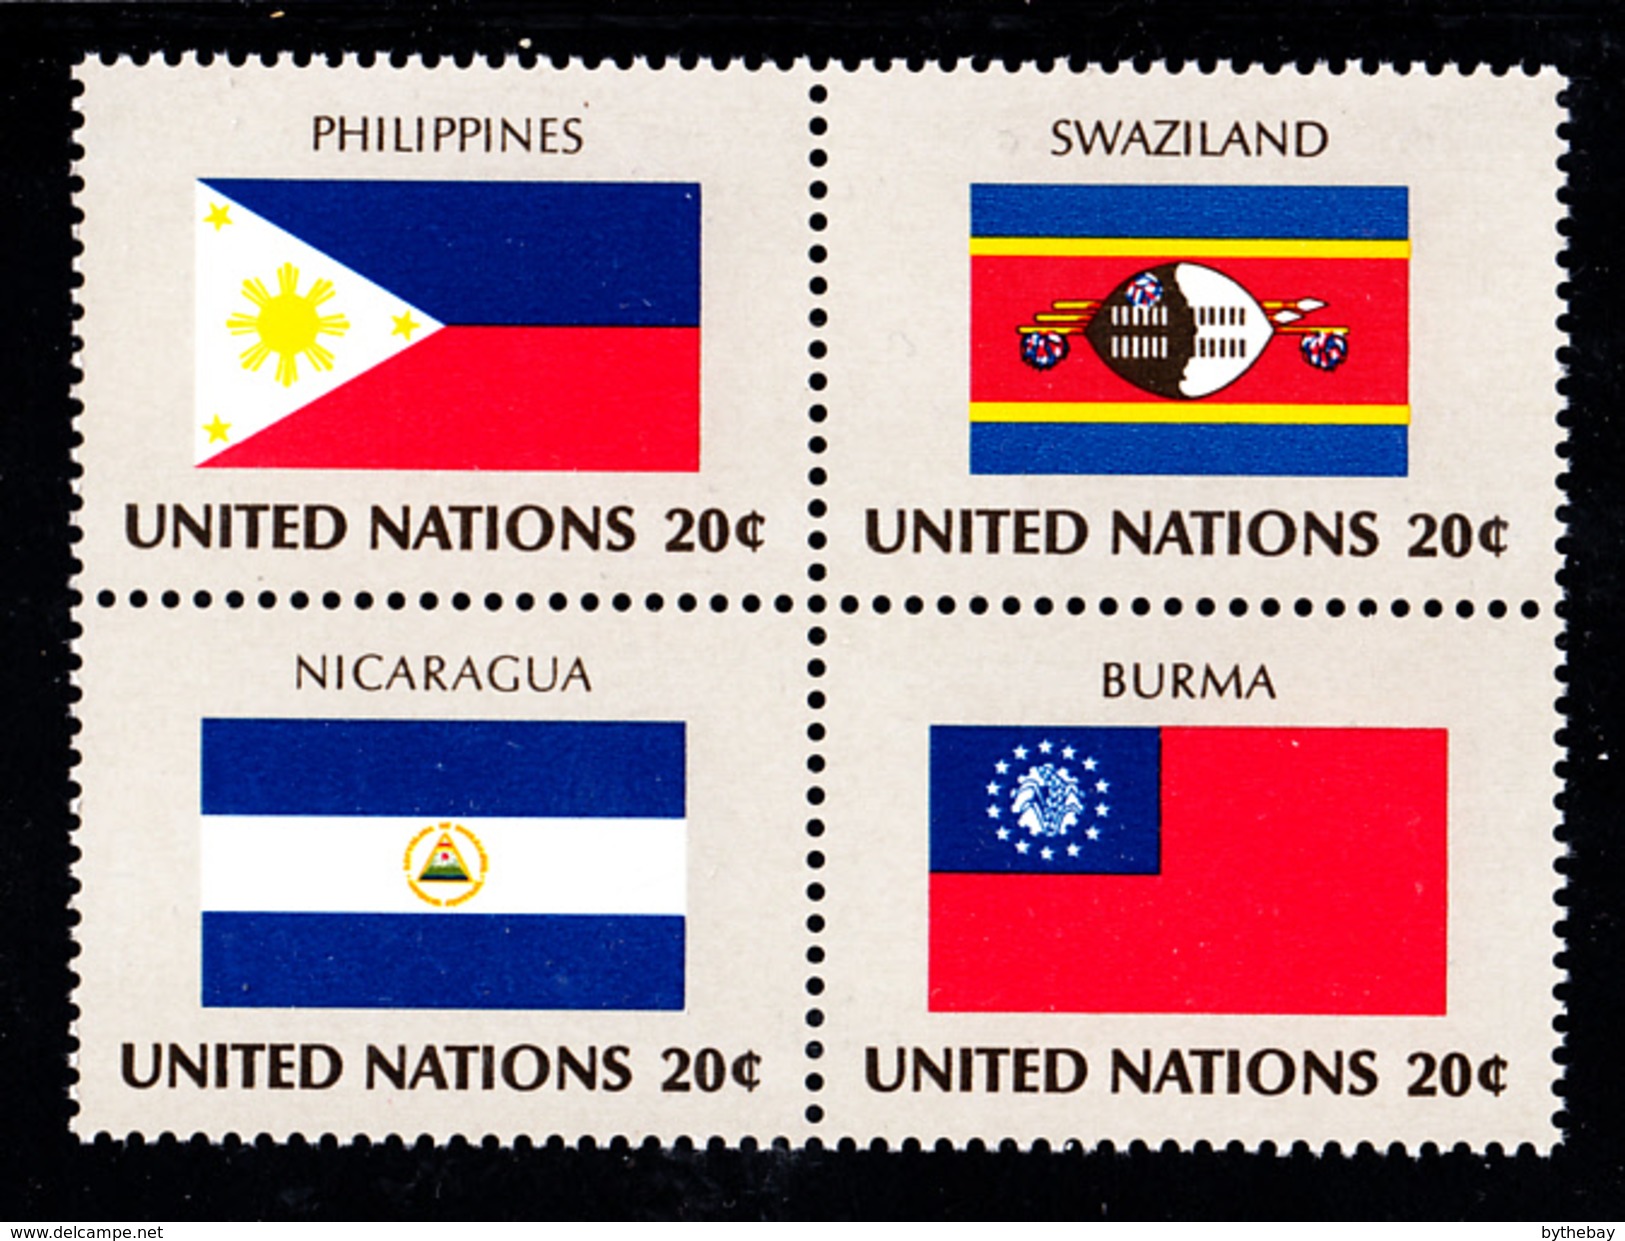 United Nations NY MNH 1982 Scott #385a Block Of 4 20c Flags: Philippines, Swaziland, Nicaragua, Burma - Ungebraucht